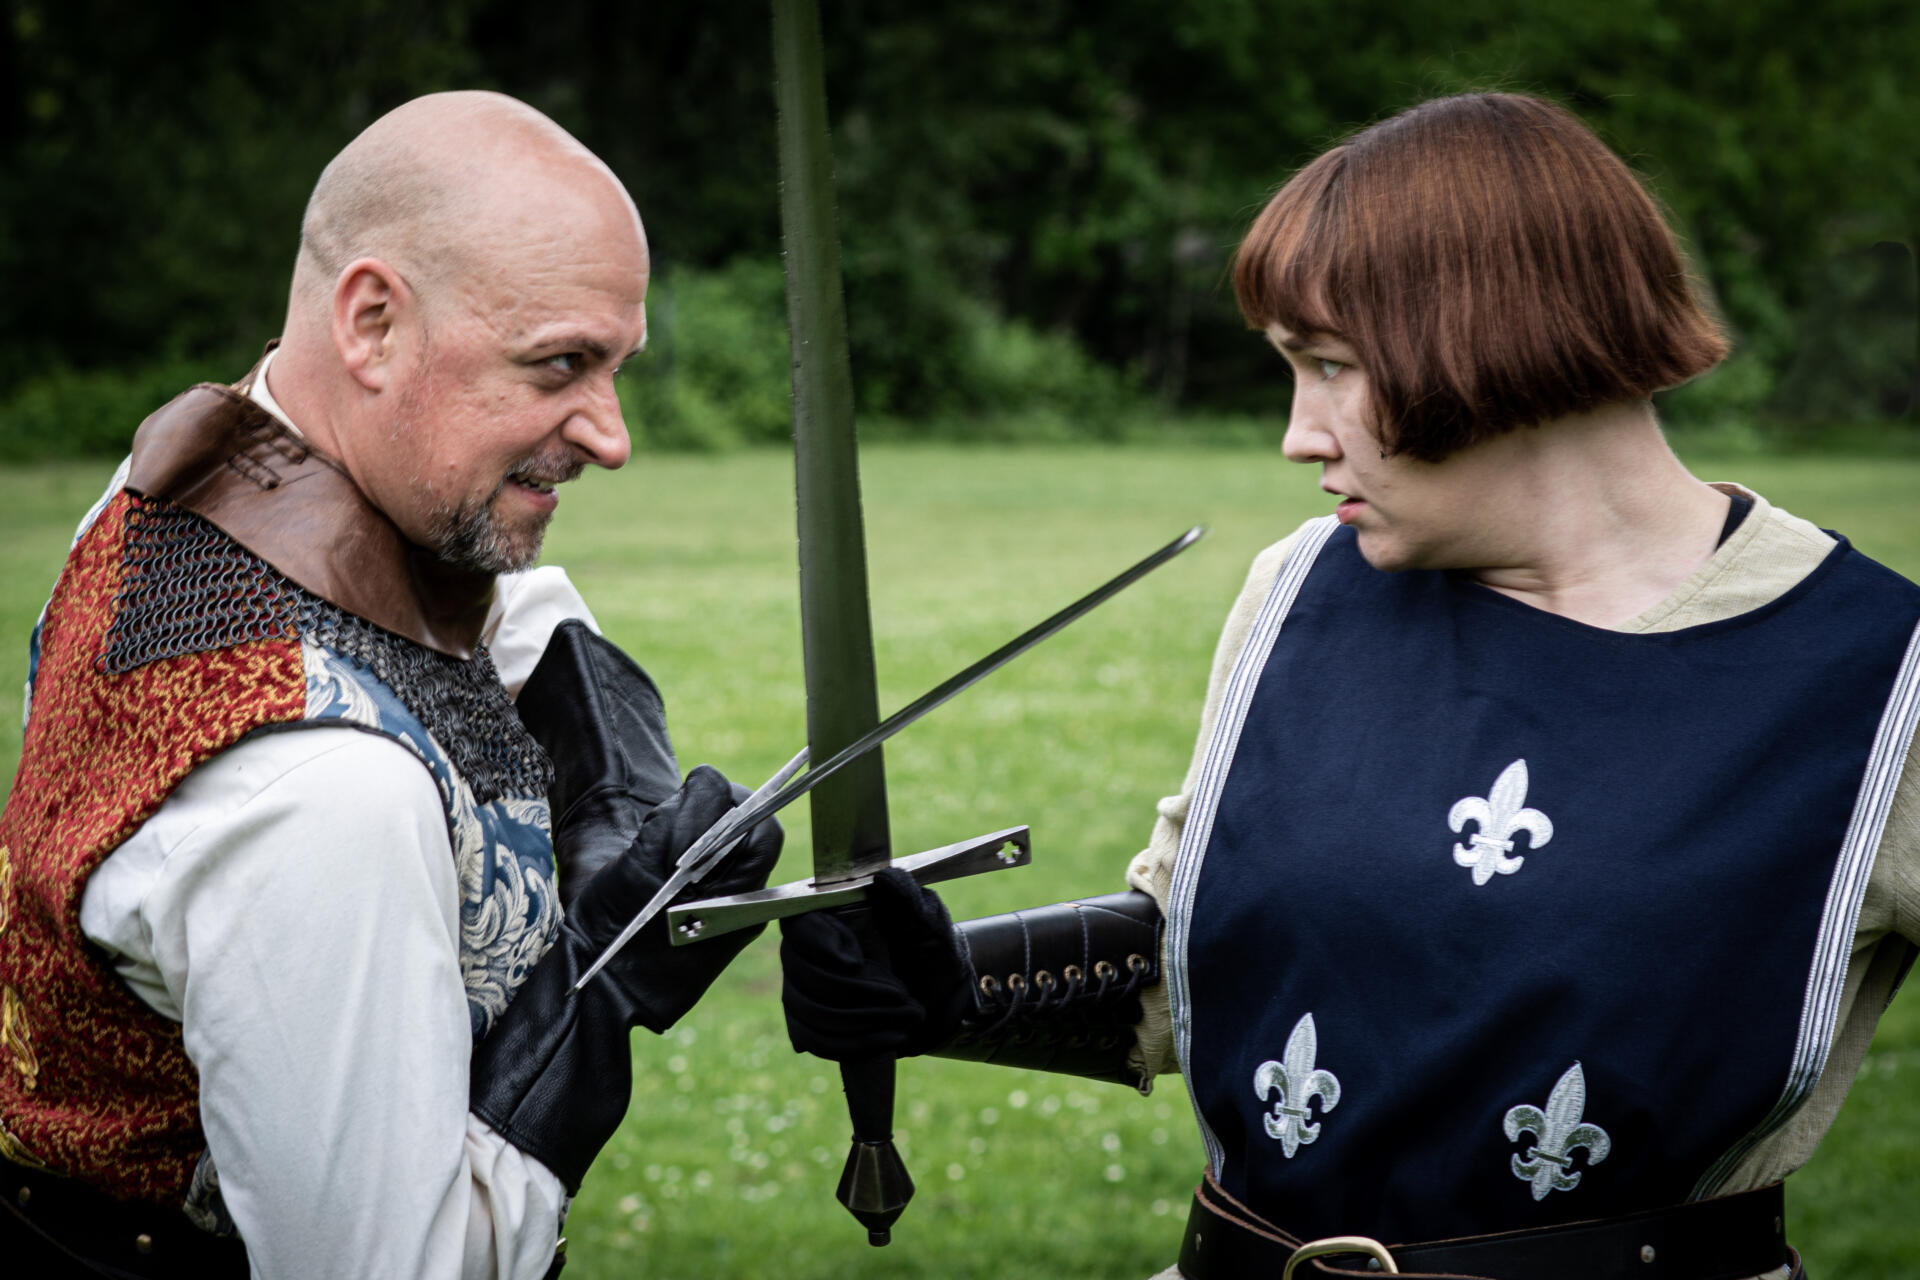 Daniel Wood as Lord Talbot and Ariel Rose as Joan de Pucelle